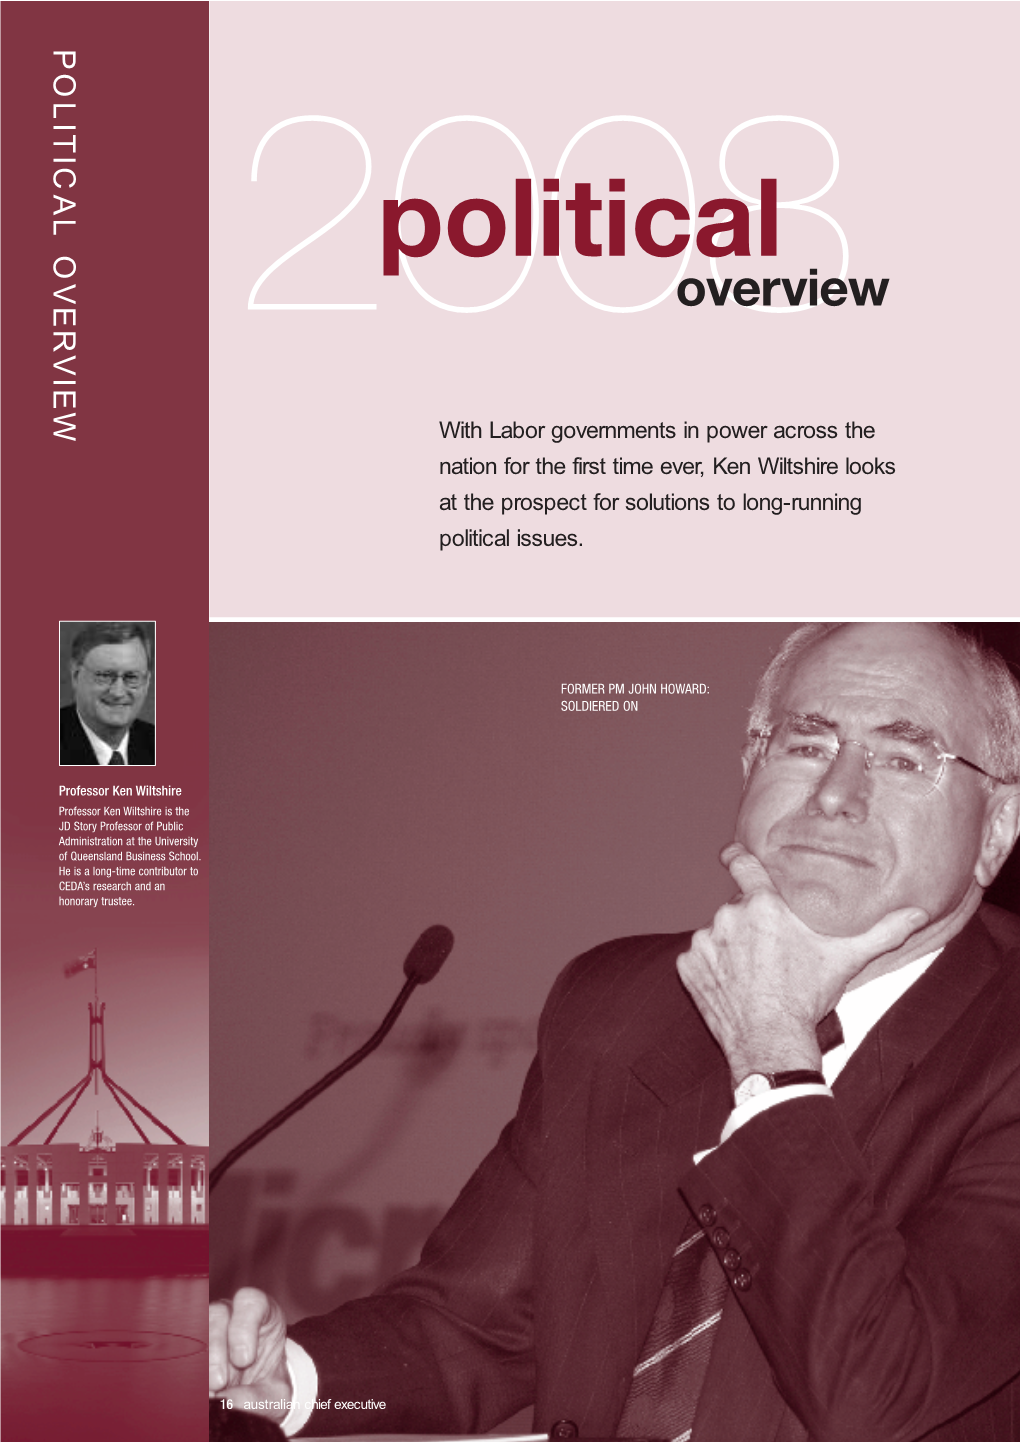 POLITICAL OVERVIEW Wiltshire Is the Professor Ken JD Story Professor of Public Administration at the University of Queensland Business School